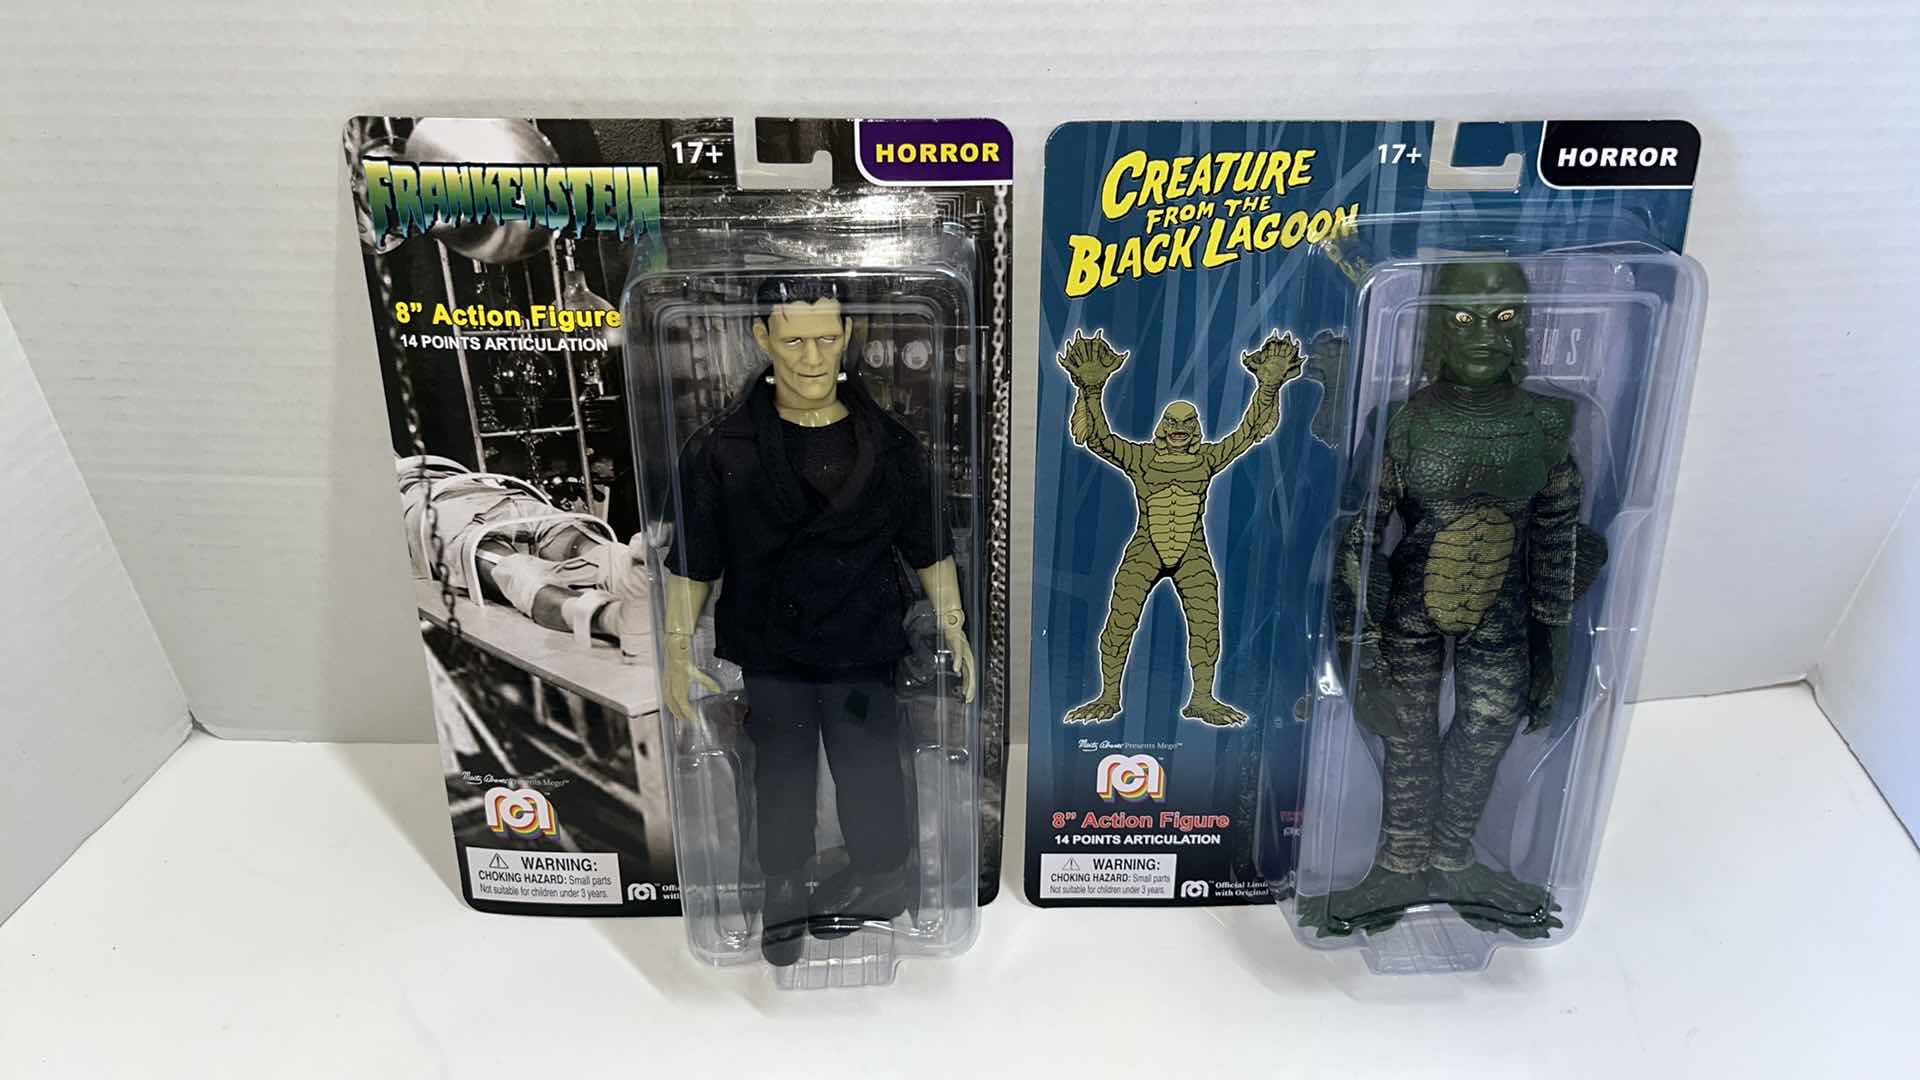 Photo 1 of NIB WORLDS GREATEST MEGO MONSTERS 8” ACTION FIGURE, FRANKENSTEIN & CREATURE FROM THE BLACK LAGOON (2)